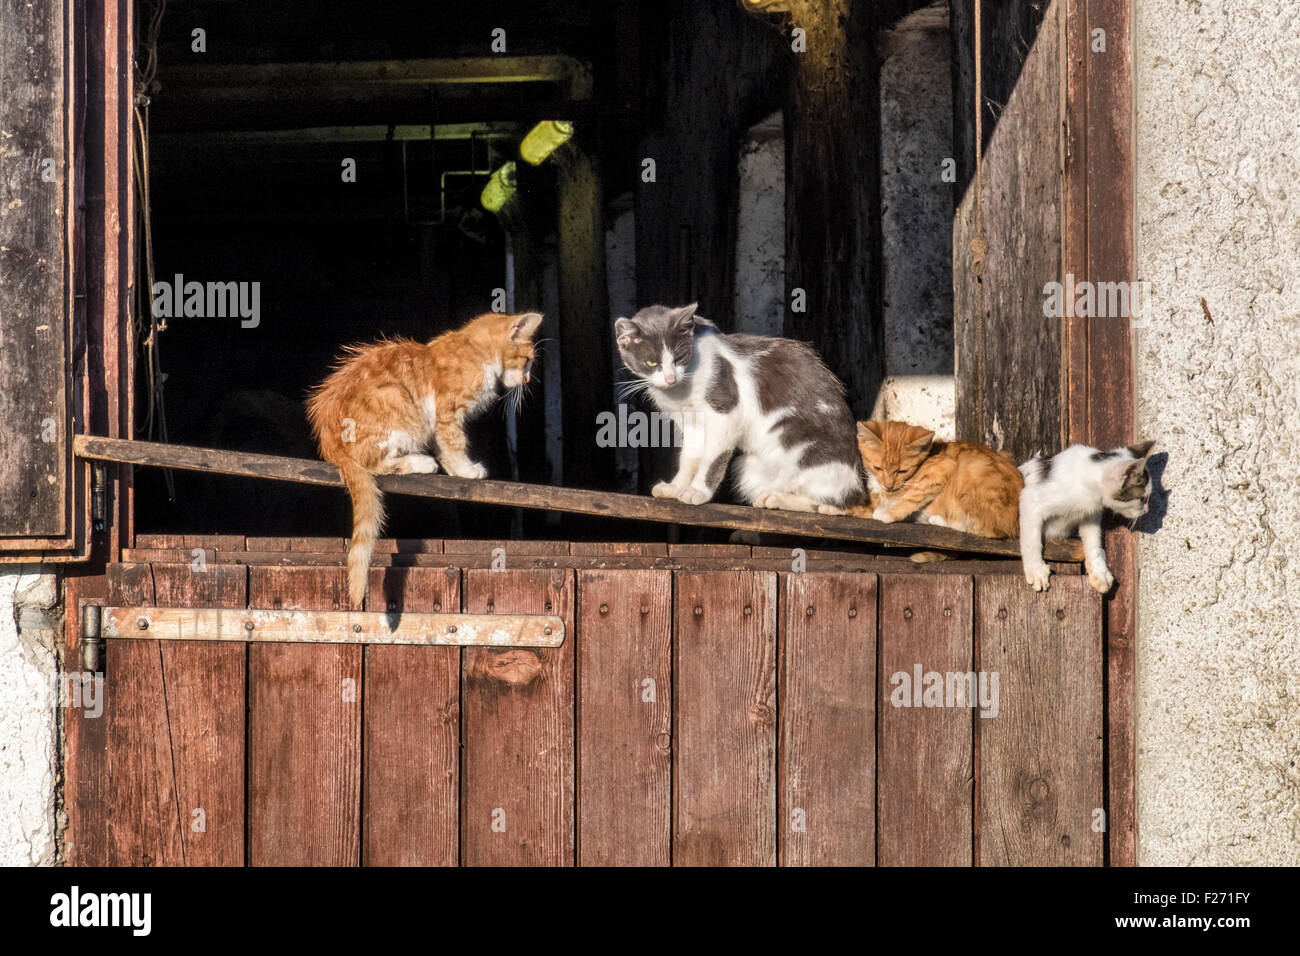 Farm cats and kittens sitting on a barn door Stock Photo